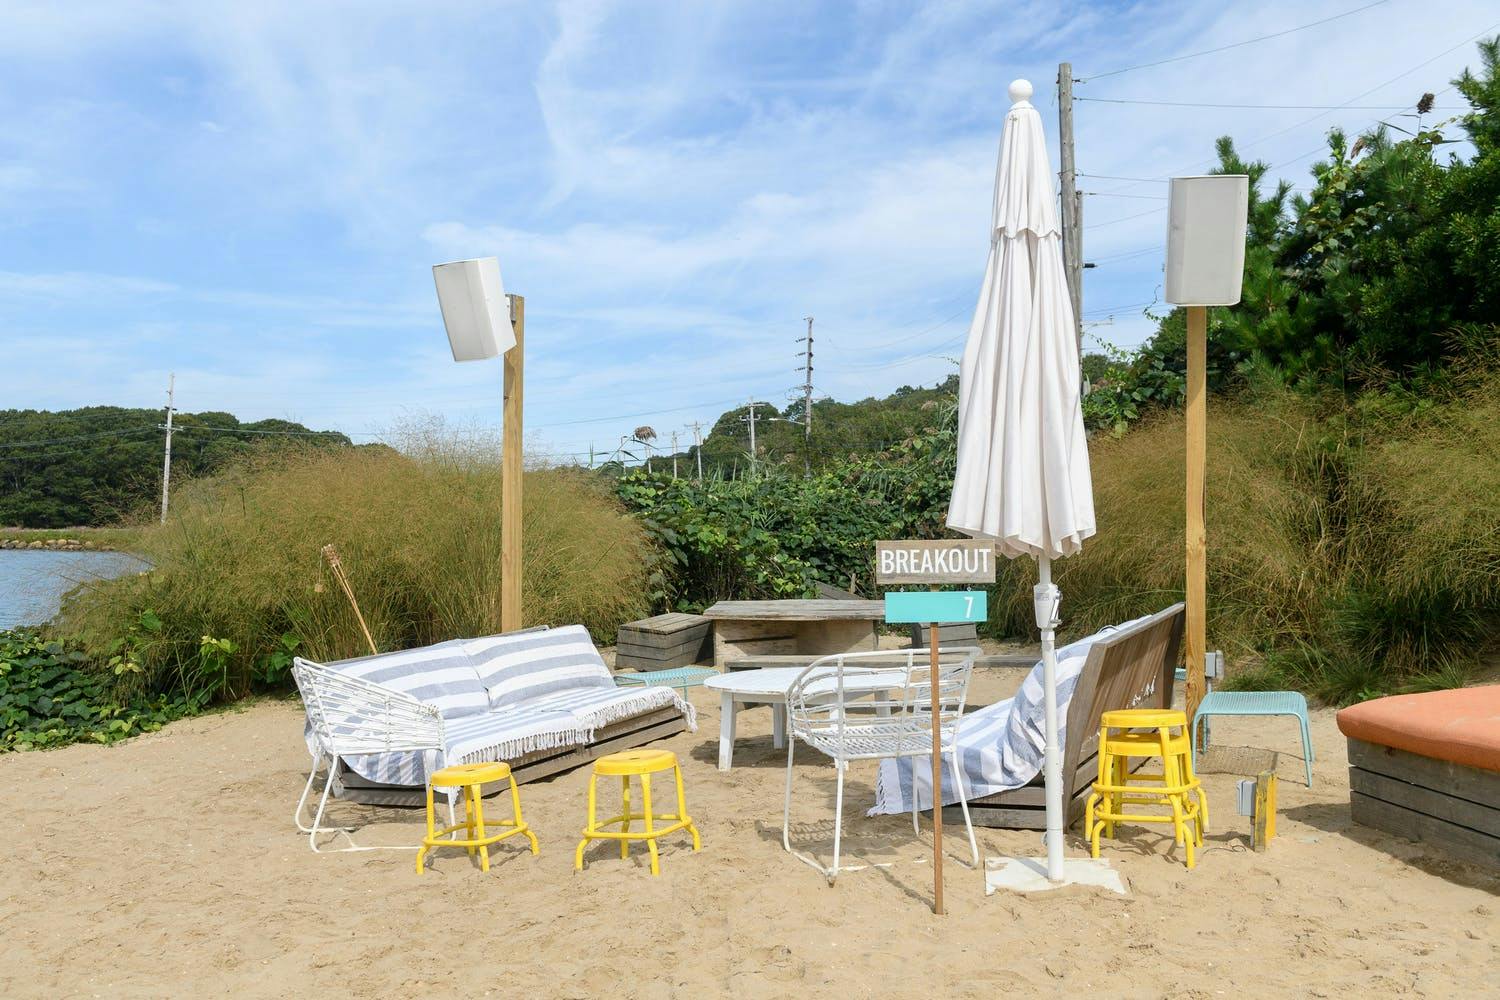 ATTENTION.IO MOAT I MONTAUK SUMMIT WITH BEACH LOUNGE NETWORKING AREA | PARTYSLATE